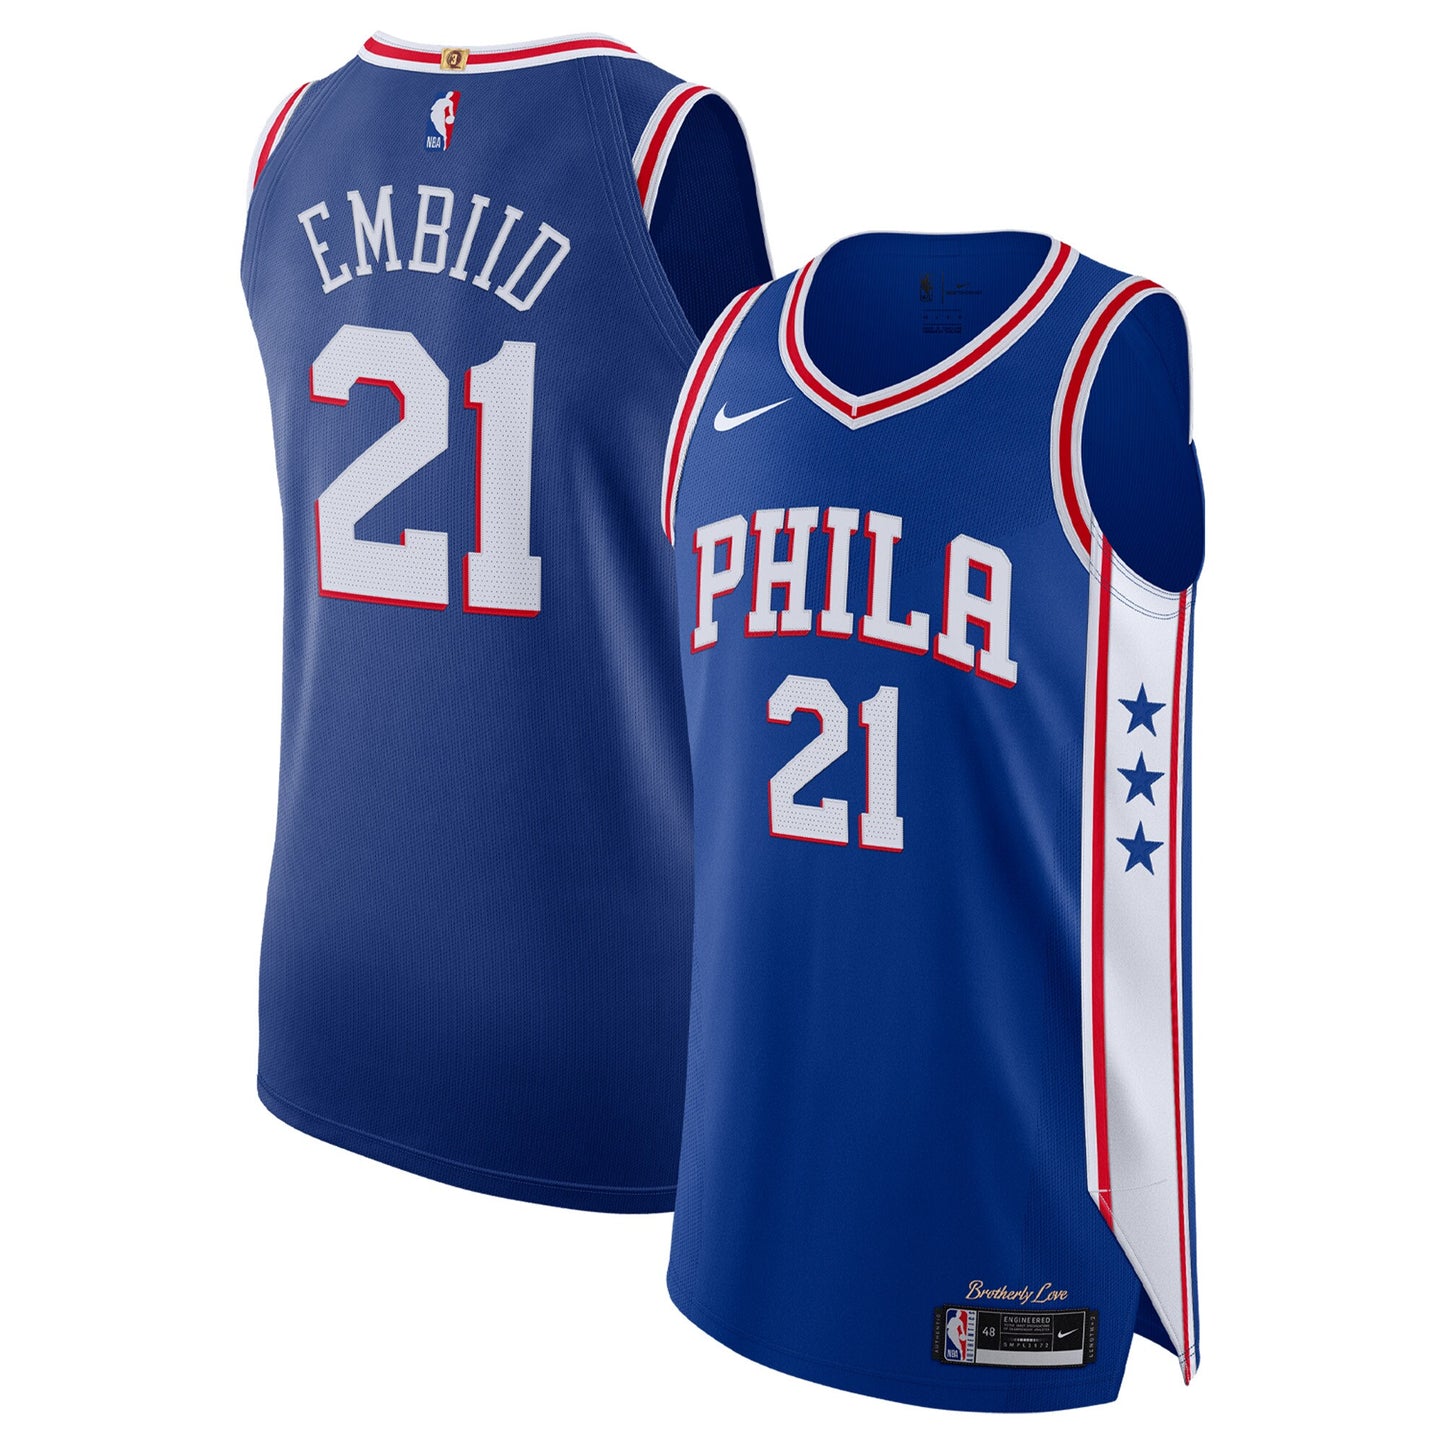 Joel Embiid Philadelphia 76ers Nike 2020/21 Authentic Player Jersey Royal - Icon Edition